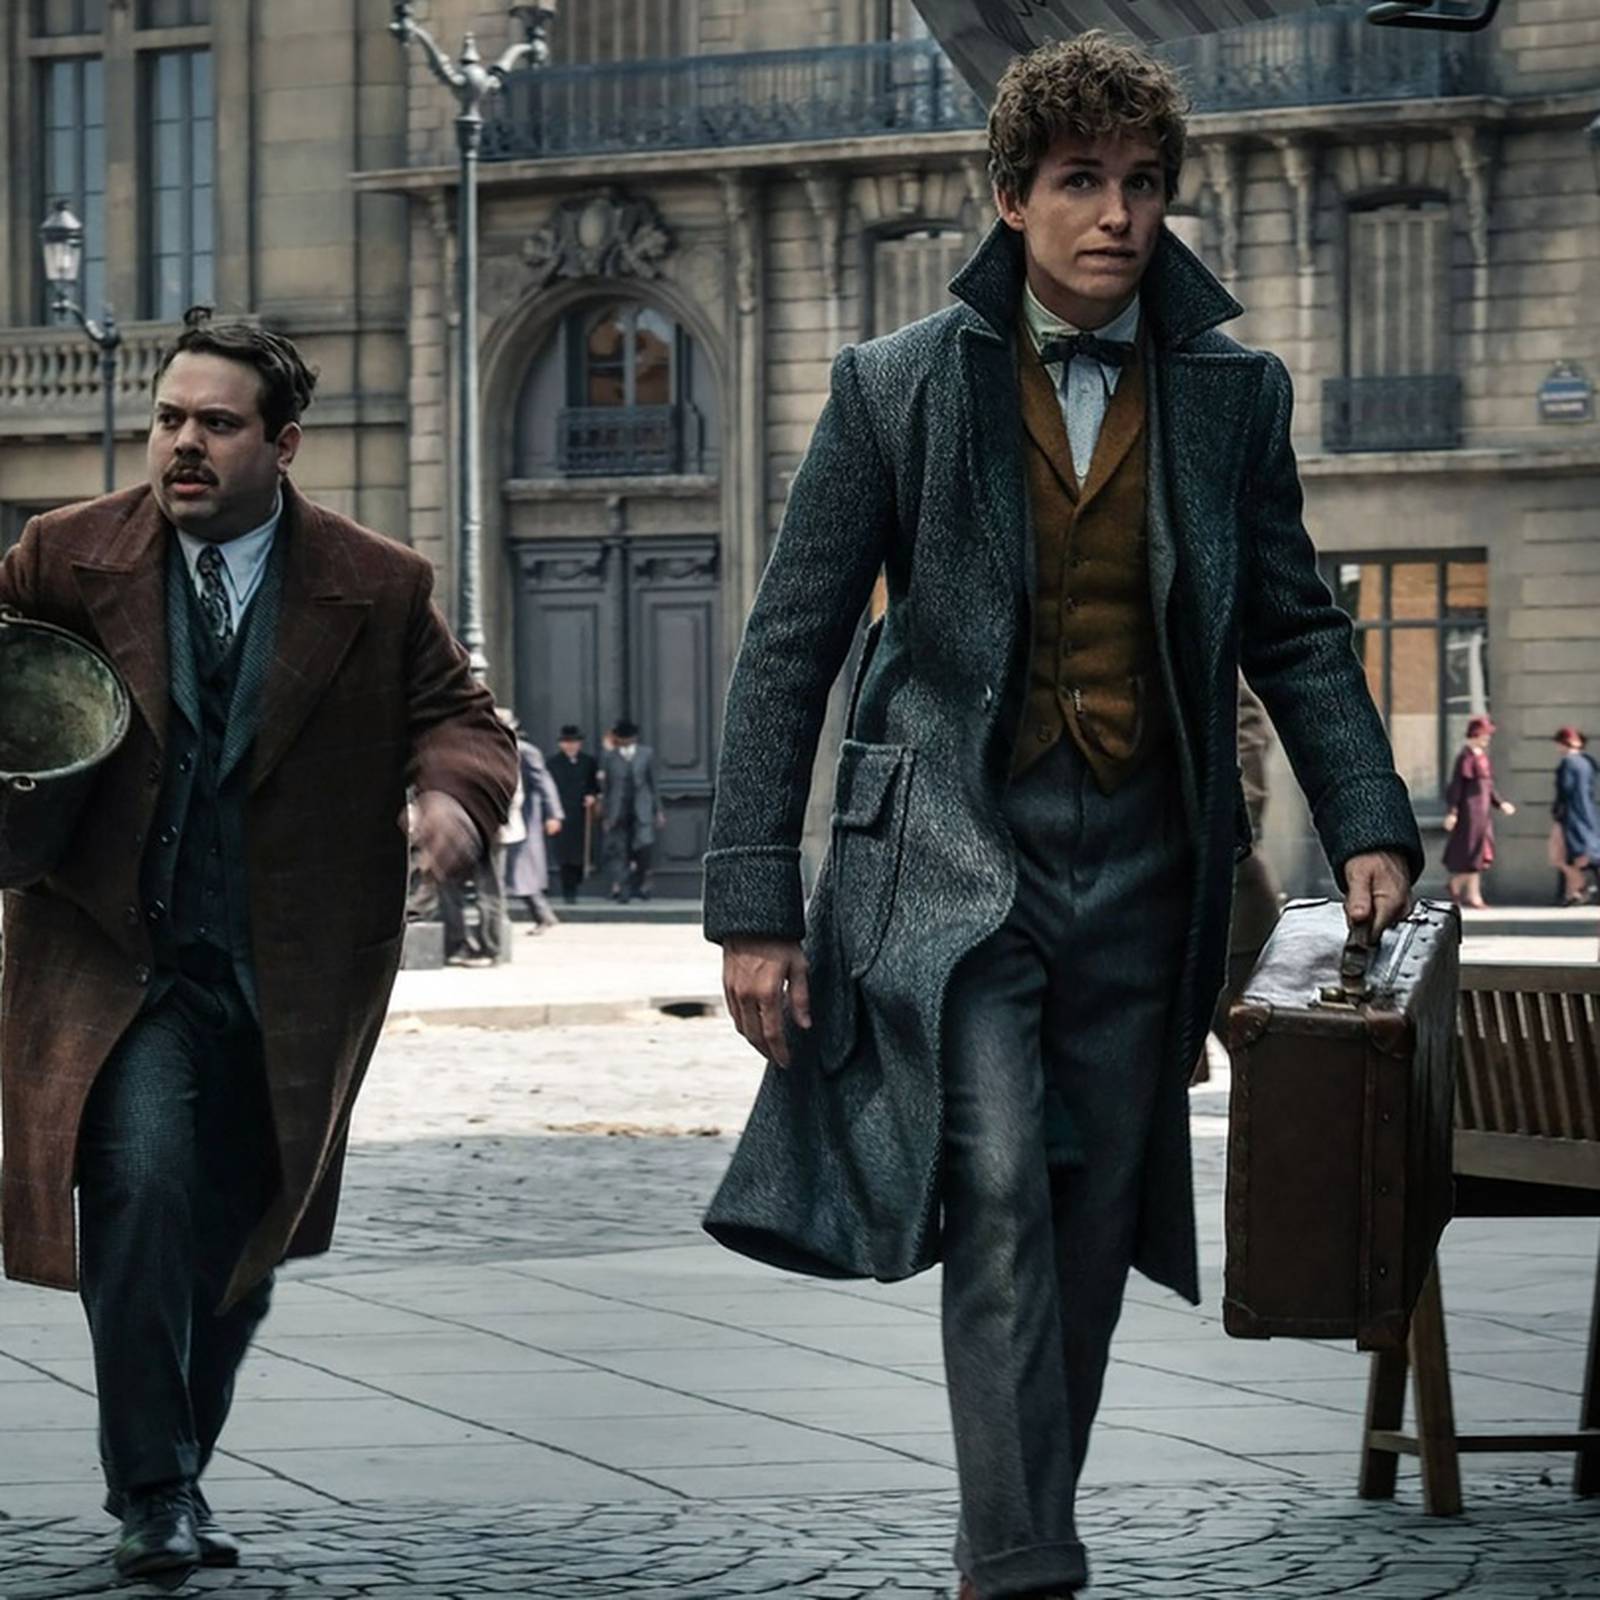 Fantastic beasts and how she creates them – The Irish Times